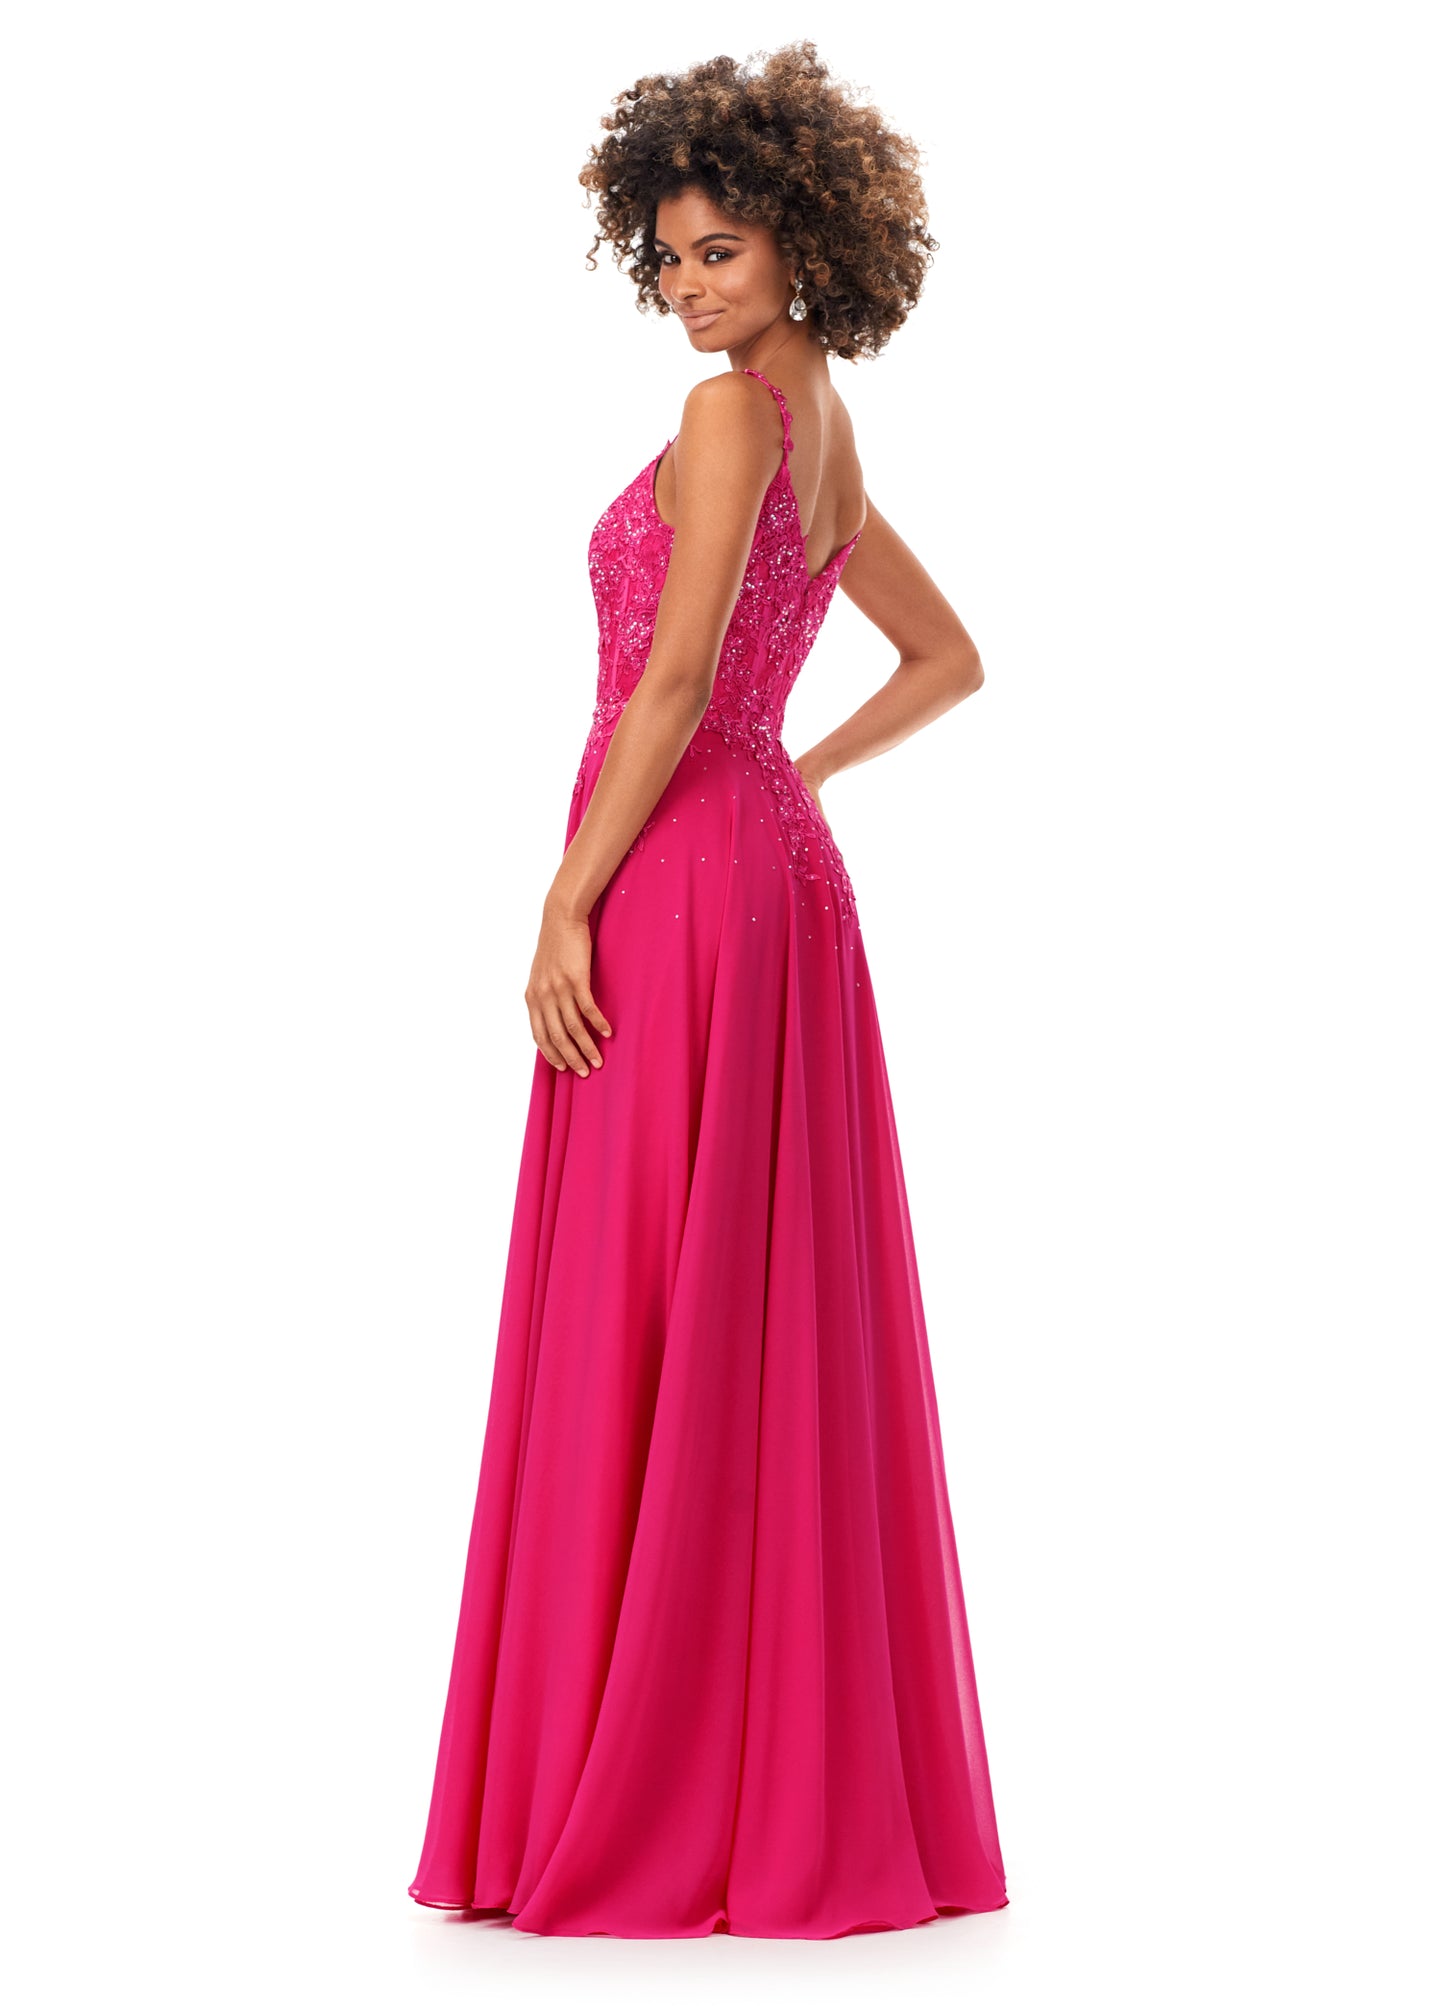 Ashley Lauren 11332 This classic chiffon prom, pageant and evening dress features a sweetheart neckline with spaghetti straps. The bustier on this dress is a corset style with lace appliques throughout. The lace appliques carry down onto the a-line skirt.